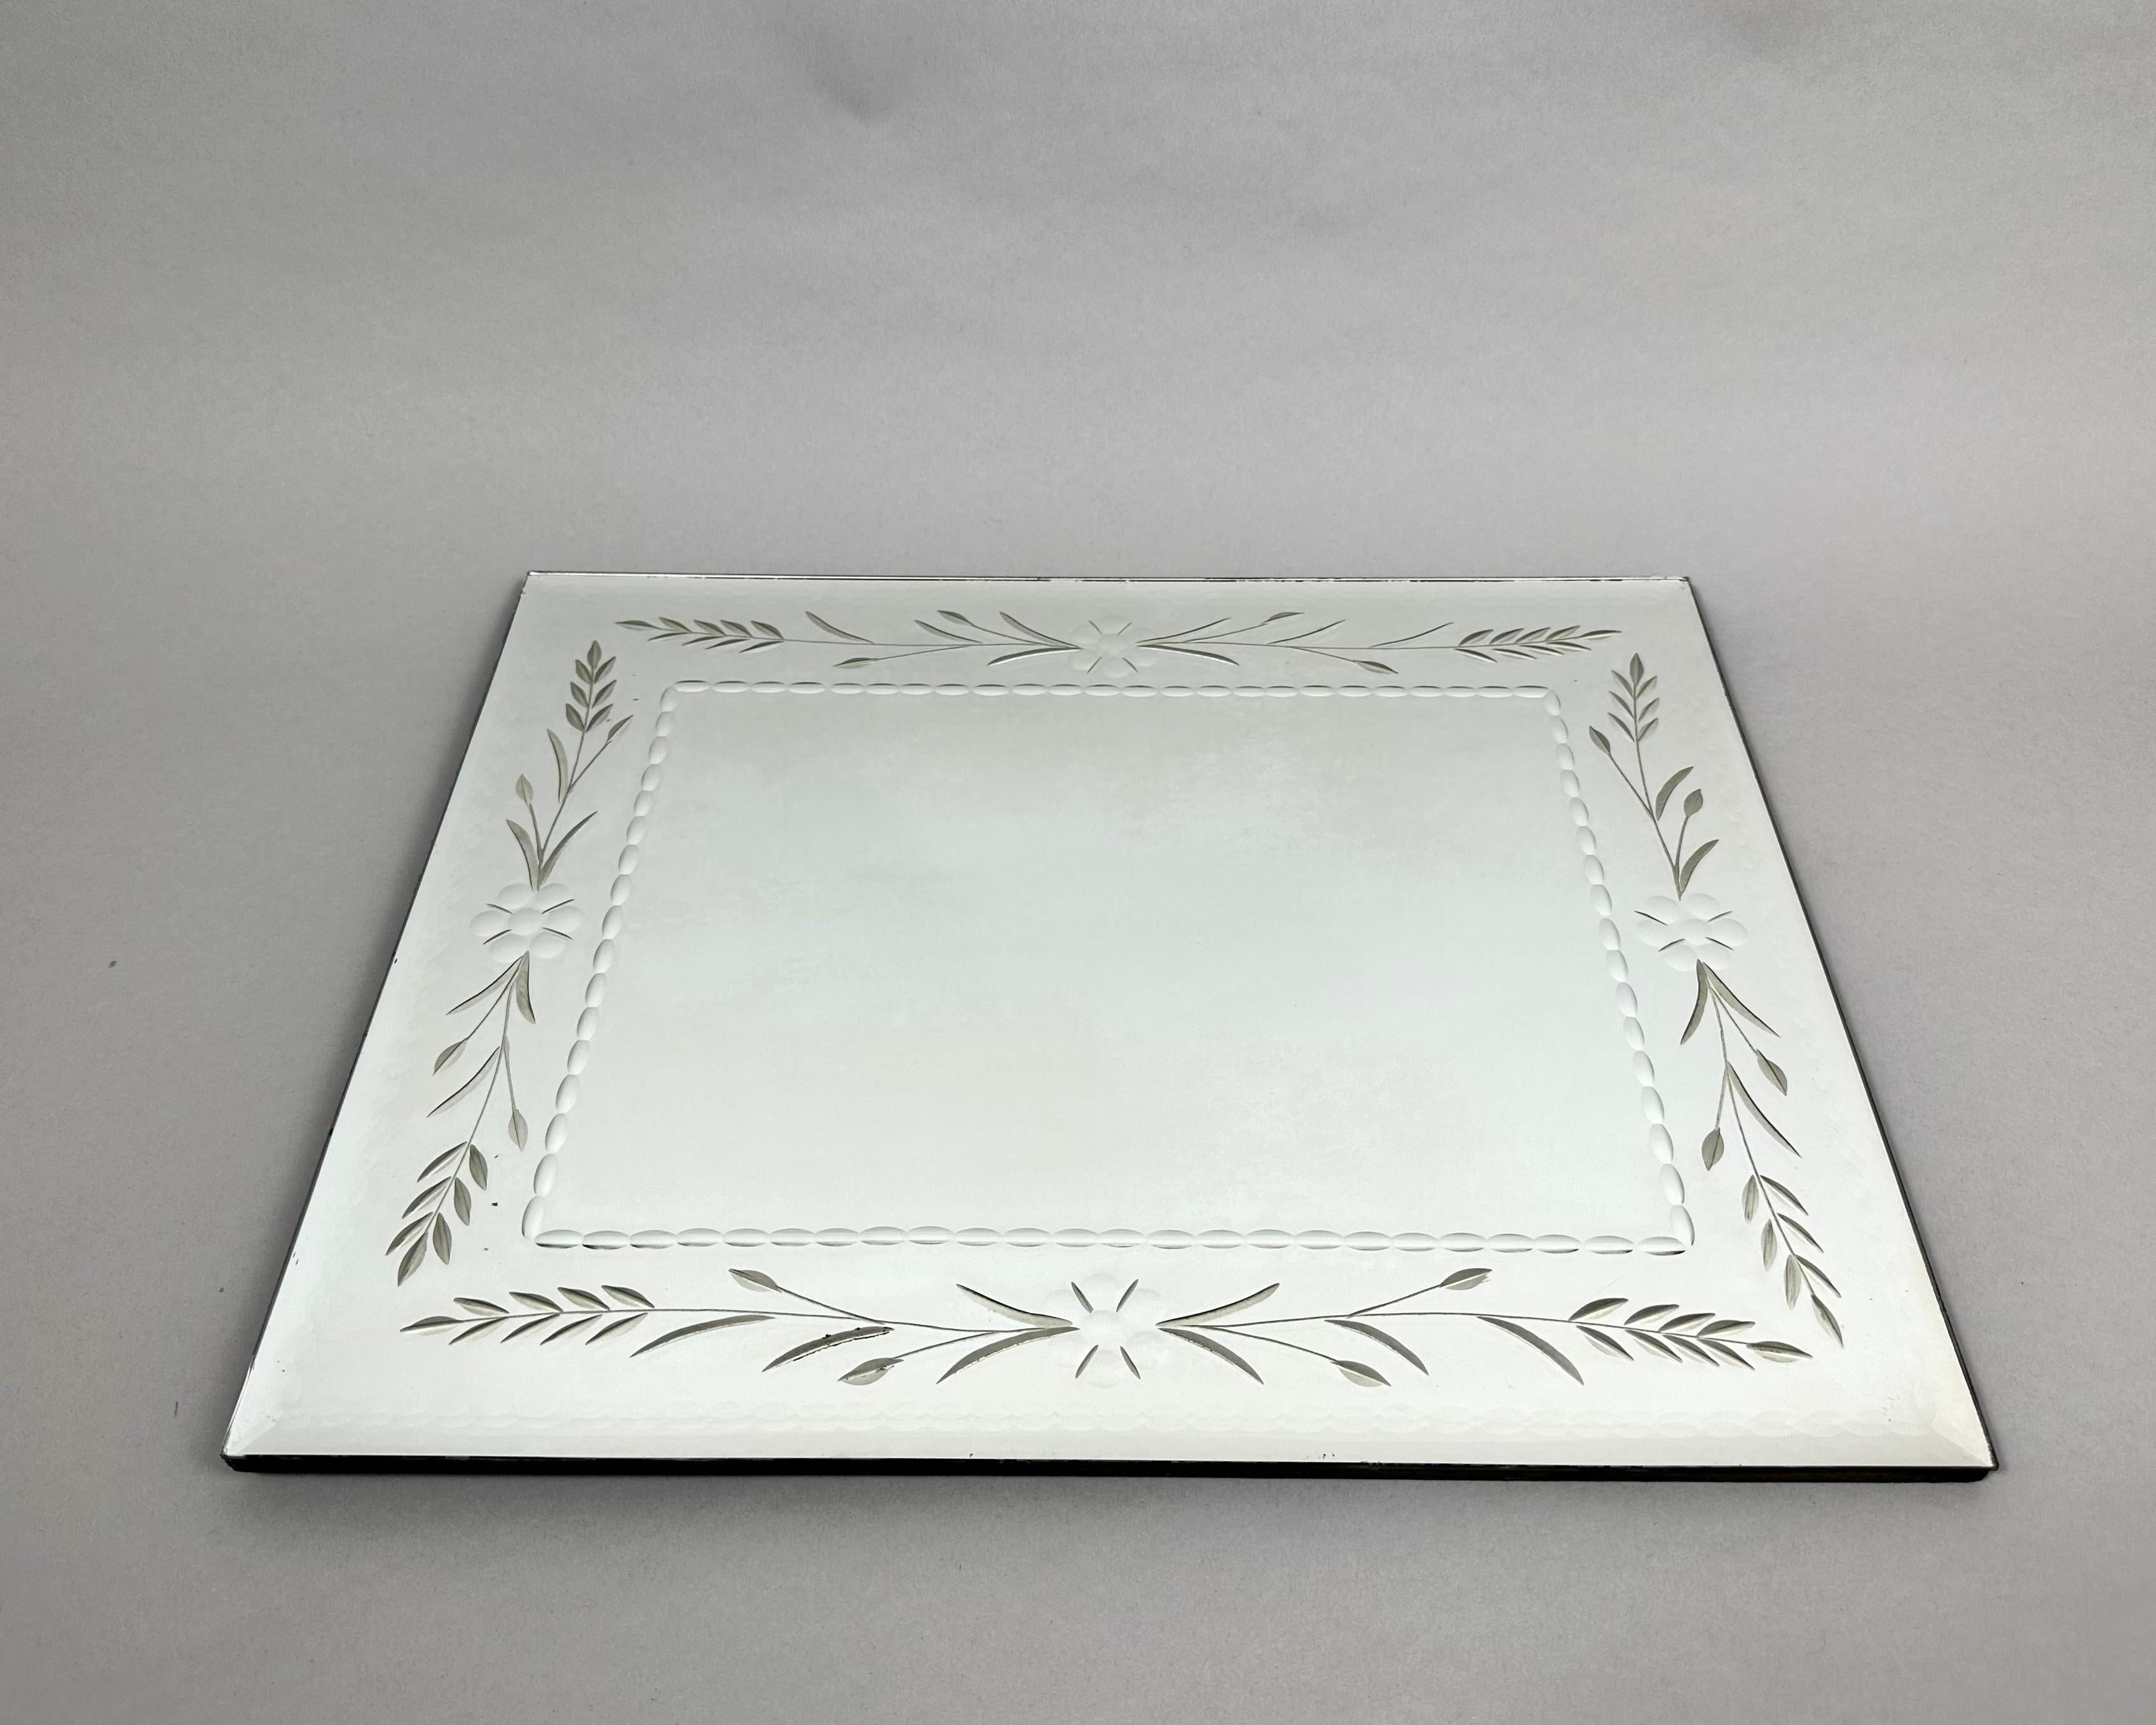 Vintage unframed wall mirror with a beautiful floral engraving on the edge.

Italy, 1990s

Carved and polished entirely by hand.

Very beautiful in reality.

This frameless square mirror is the perfect accent piece for your entryway, bathroom,